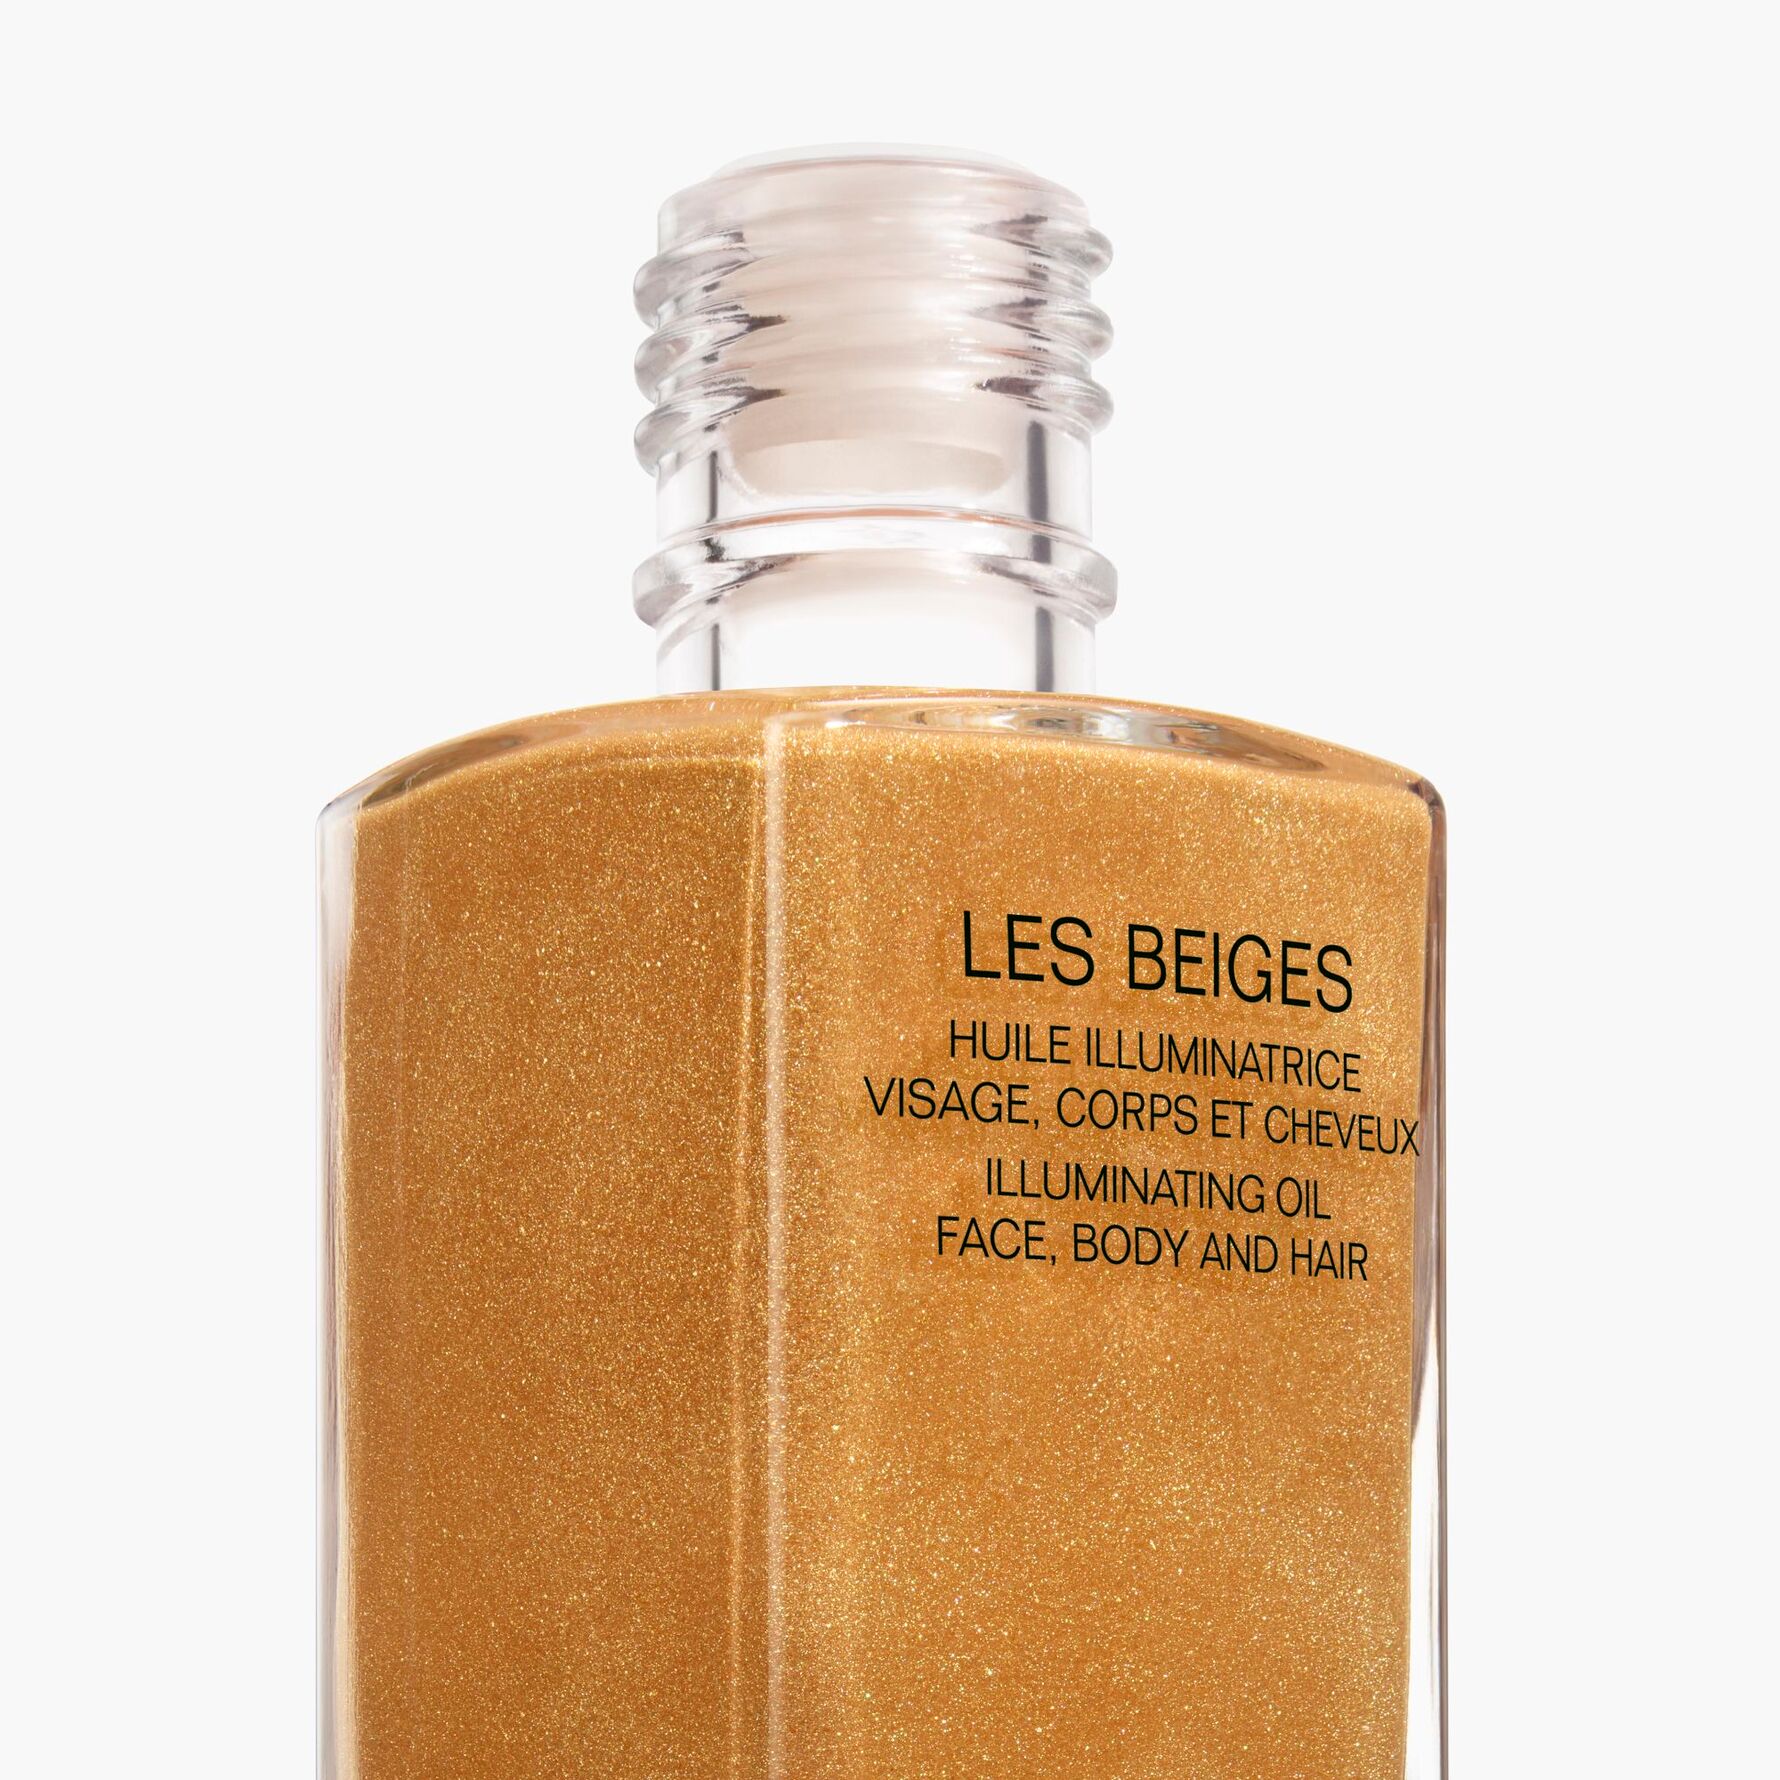 Chanel les beiges hair and body oil｜TikTok Search